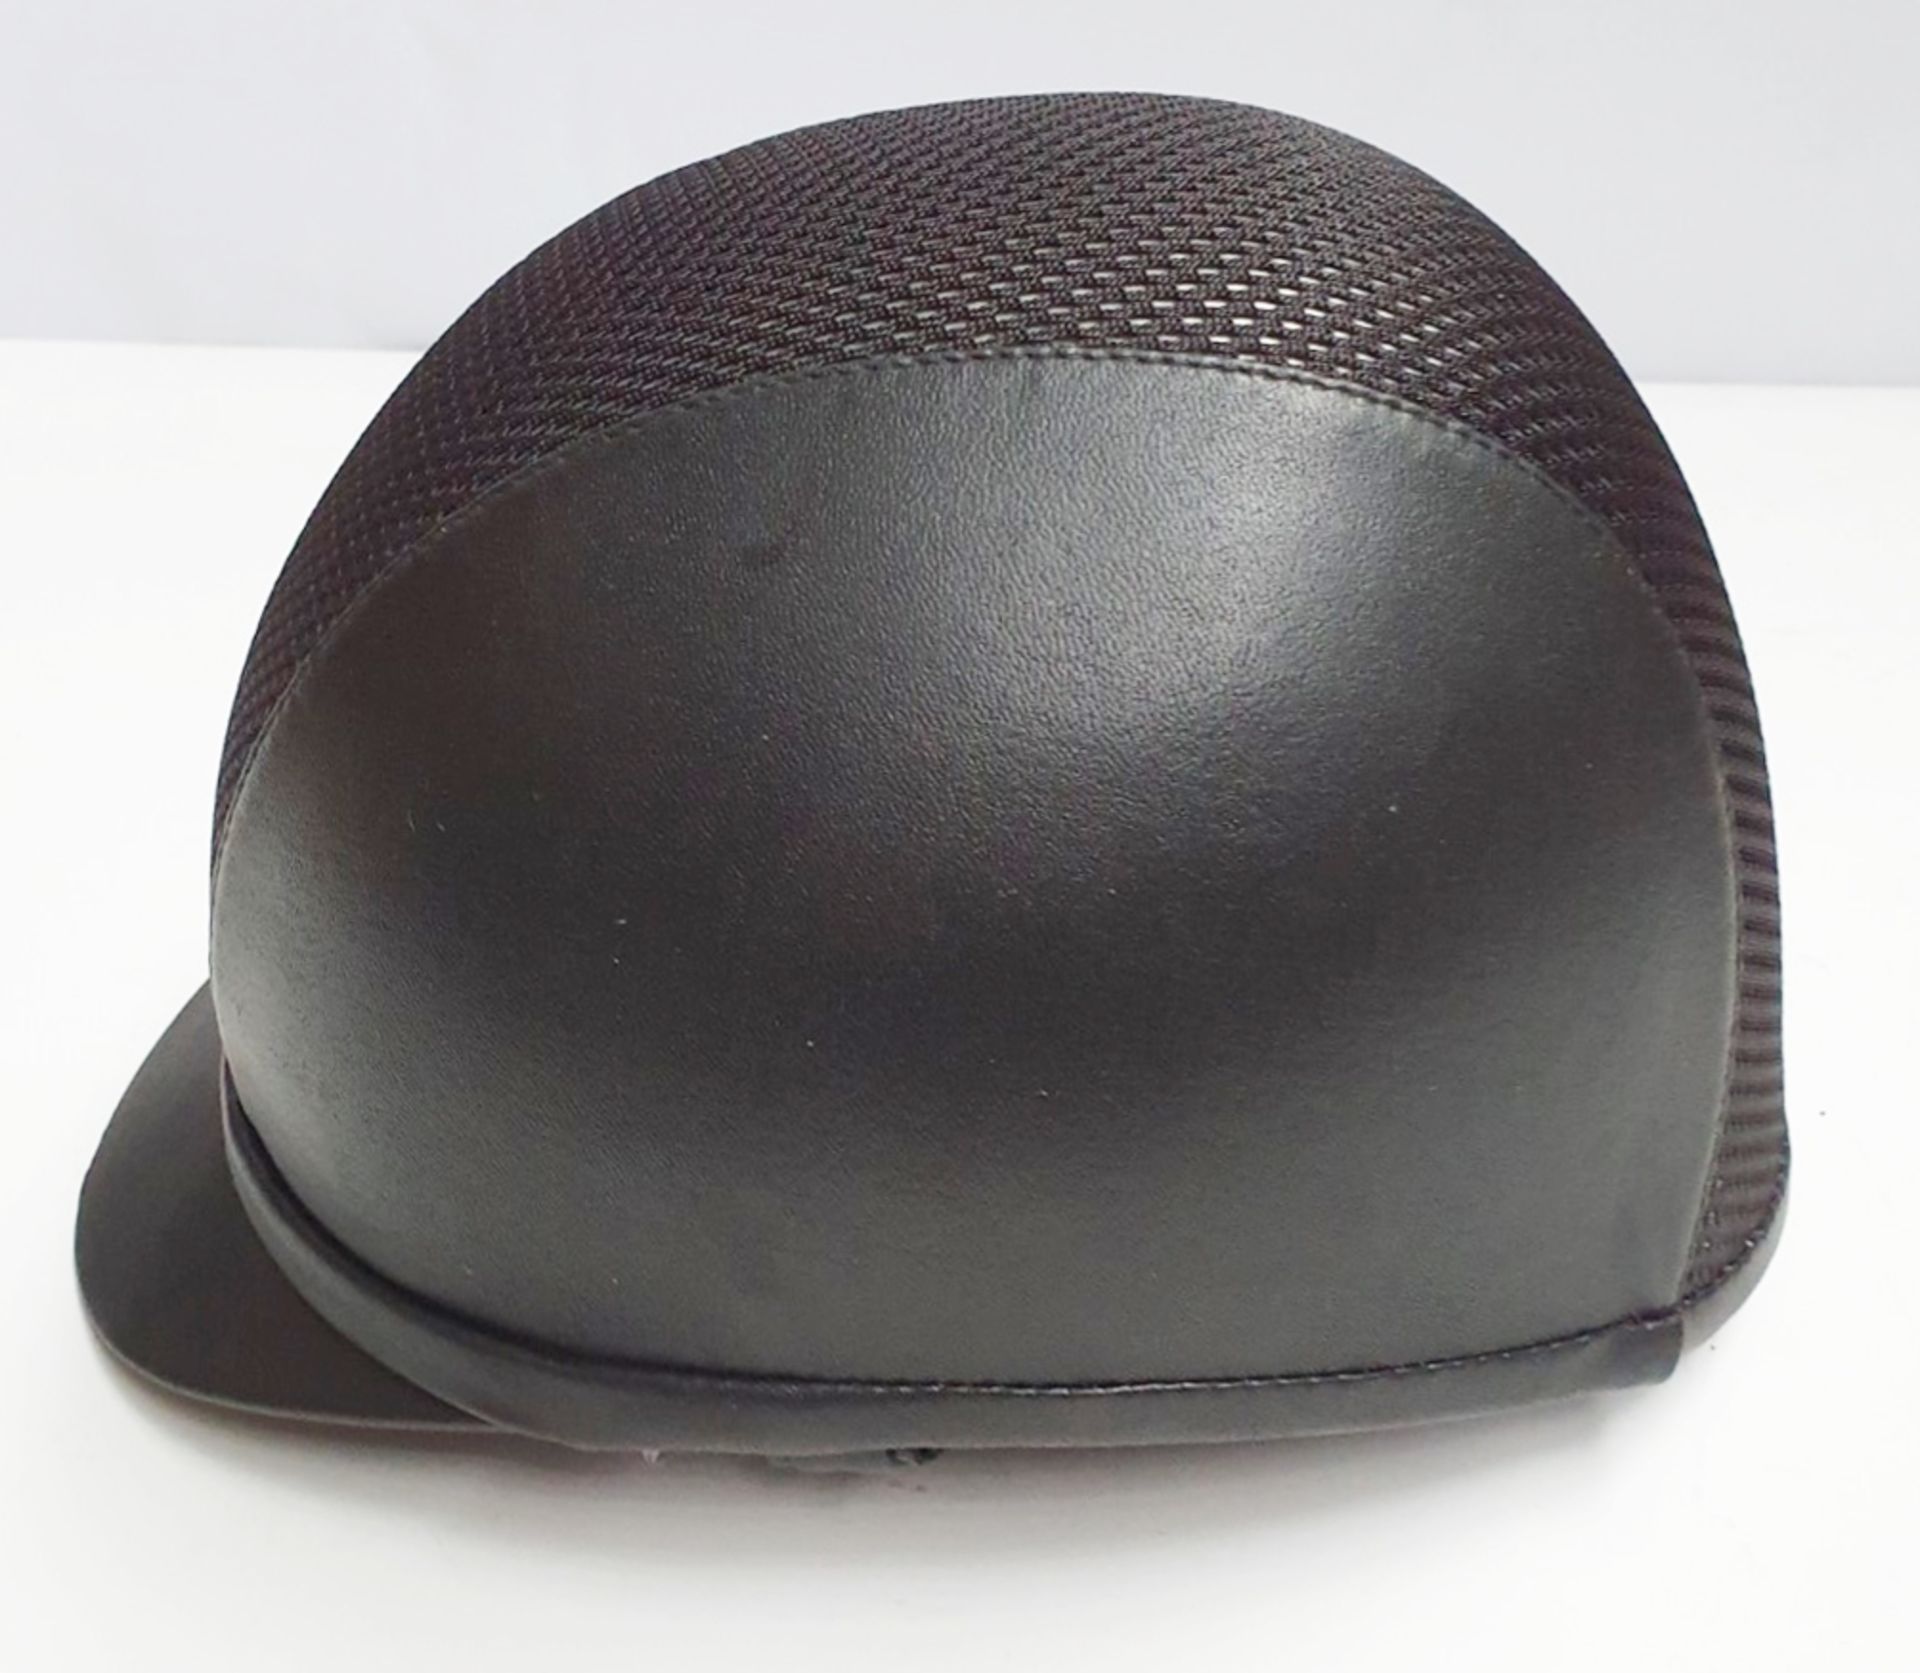 1 x Charles and Owen Horse Riding Helmet in Black / Silver and Mesh - Size 54cm - Ref722 - CL401 - B - Image 5 of 12